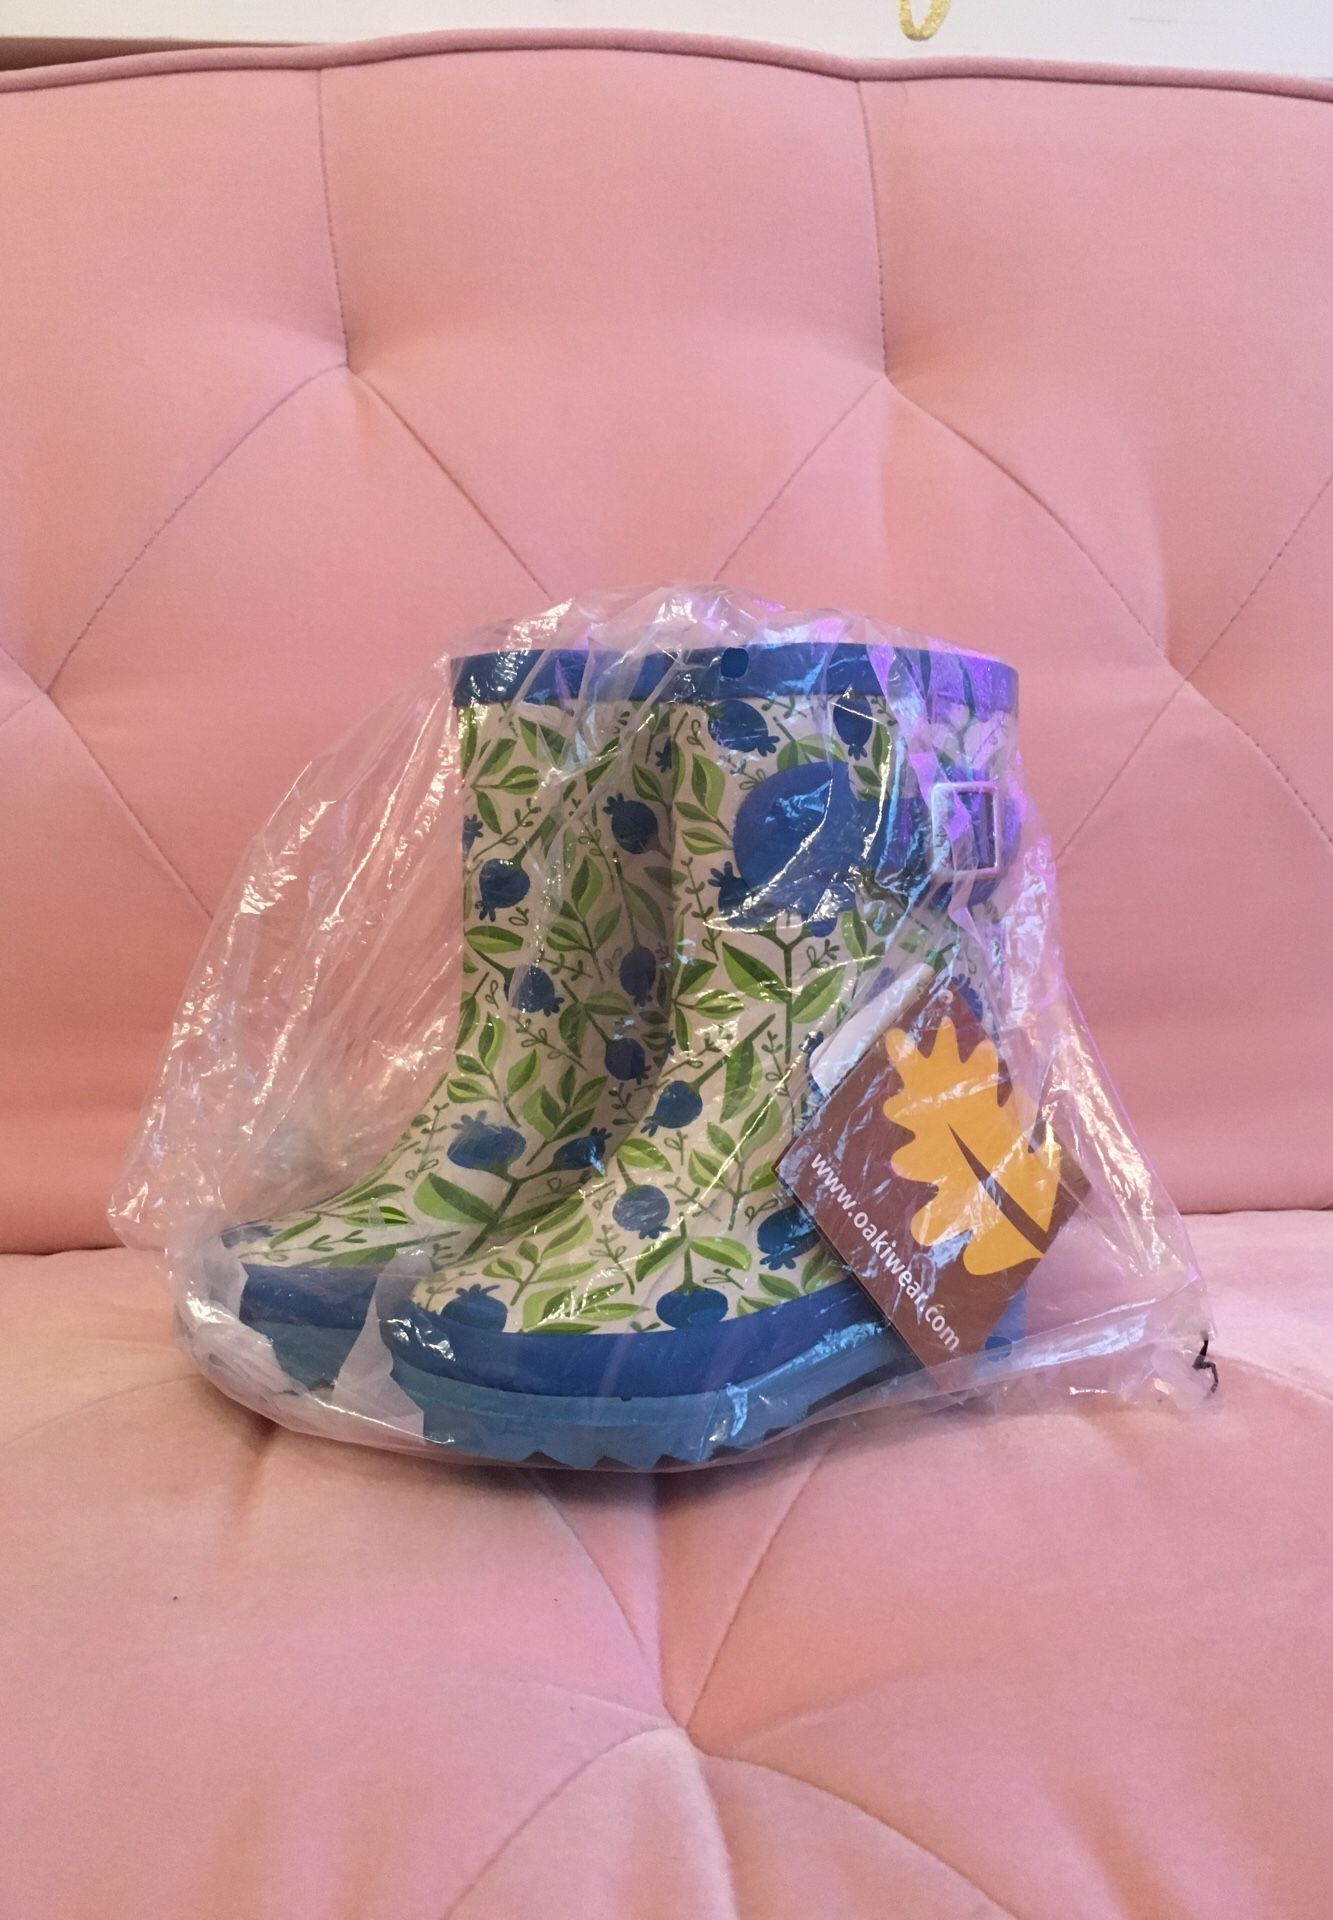 Lil girl rain boots, size 7. New with tags